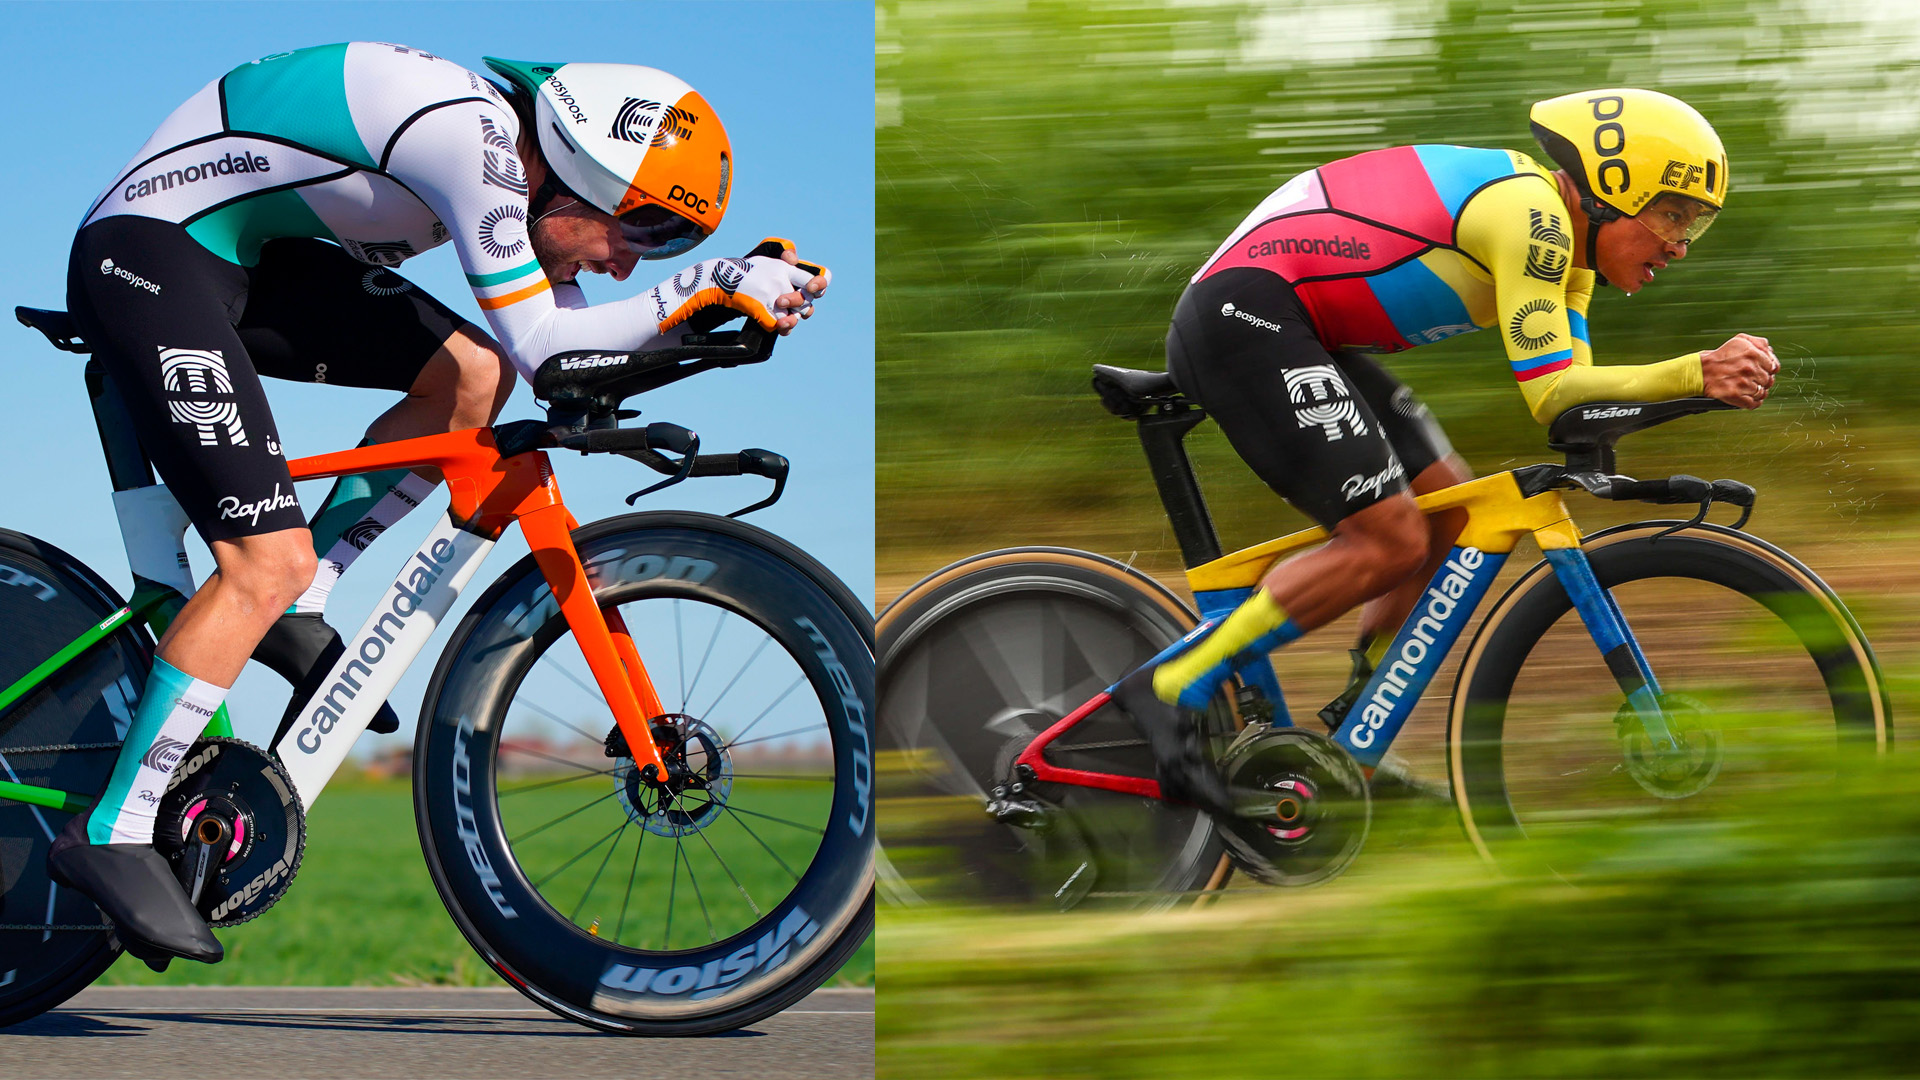 This photo is split vertically down the middle and compares Ben Healy and his time trial position, which looks very aerodynamically optimised with his low torso angle, arced back and face almost resting on his forearms, to his teammate Jonathan Klever Caicedo's position on the right. Caicedo's position means his torso is much more upright, his head sits above his torso and he overall looks less aerodynamic looking. 